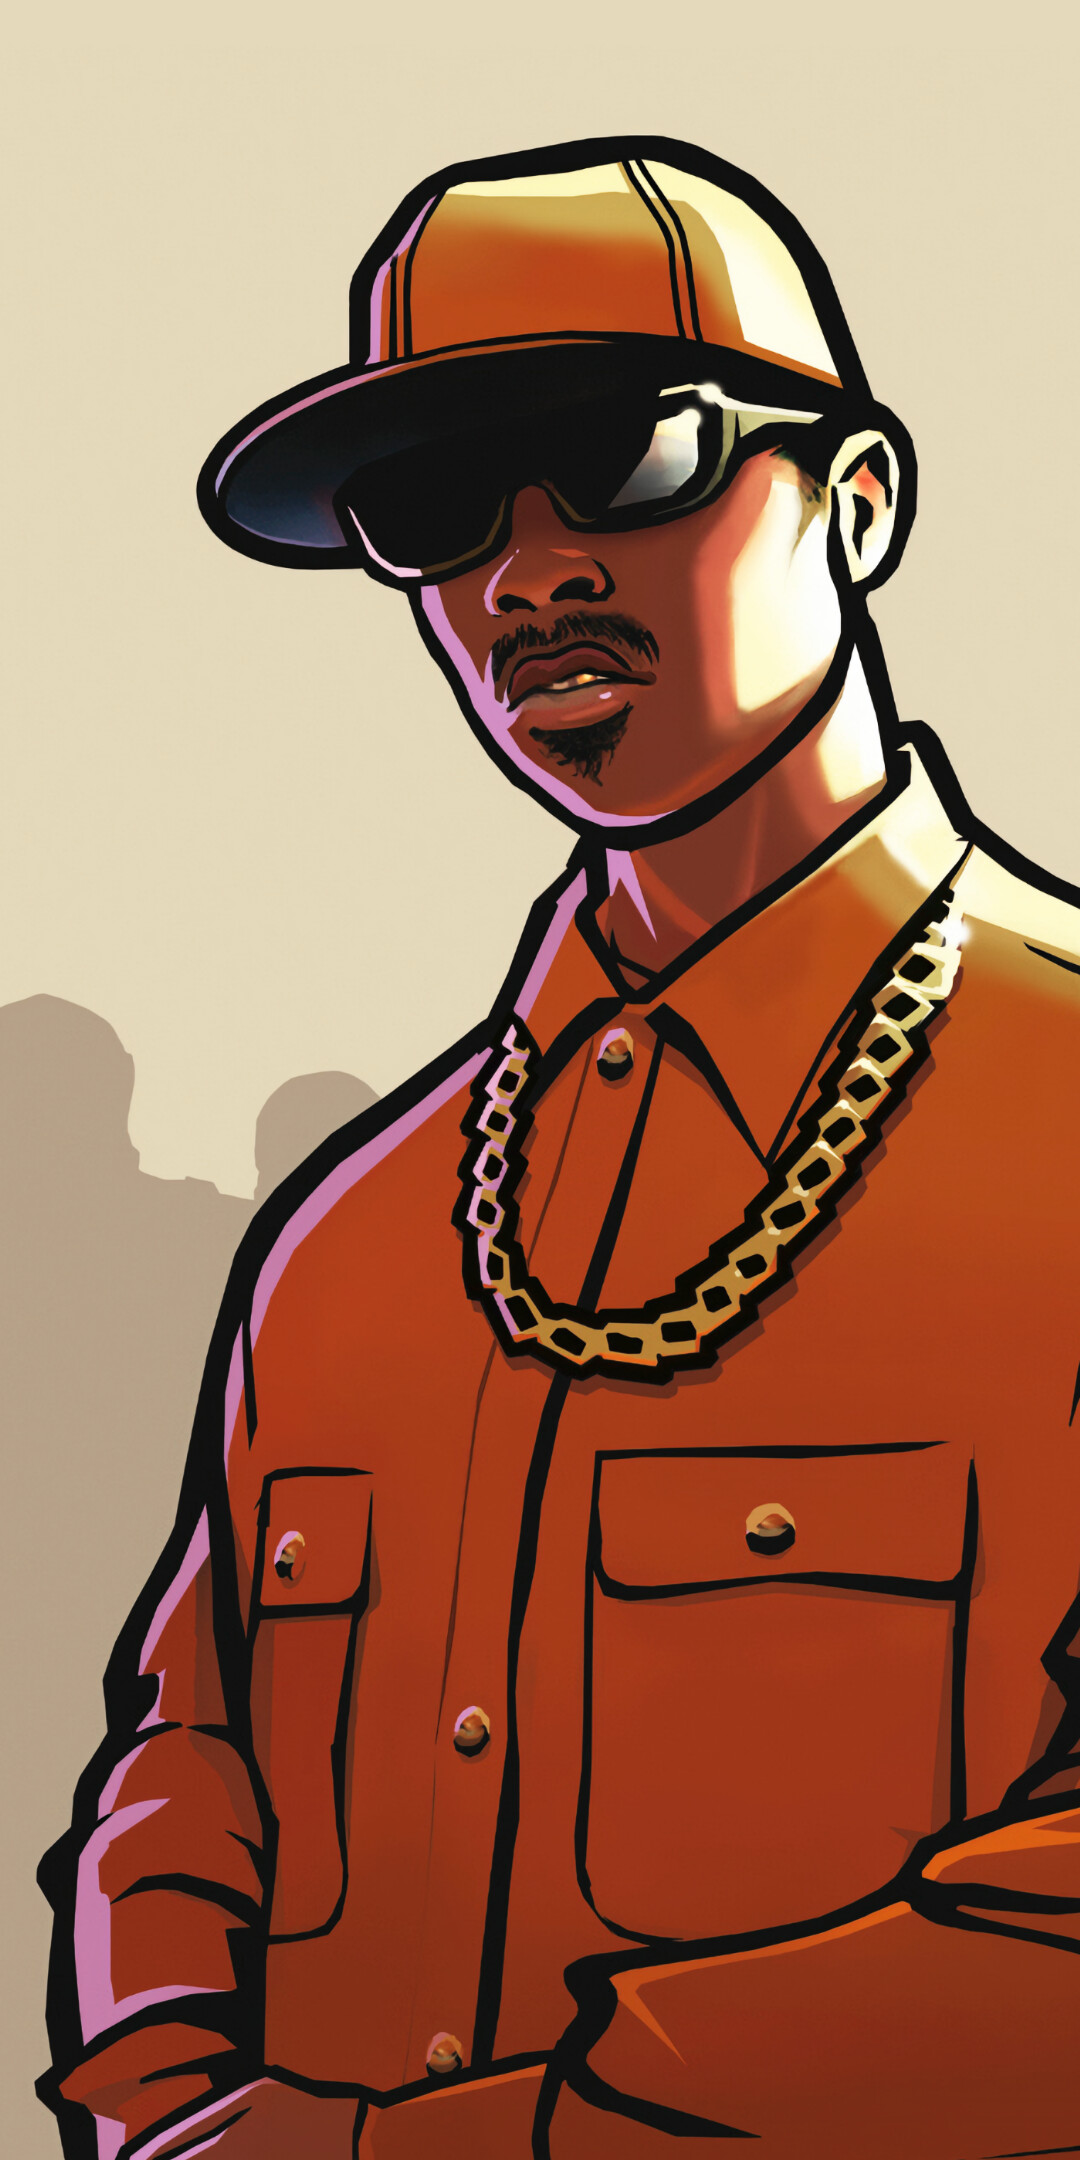 Grand Theft Auto: San Andreas: Game's storyline, Carl, Depicted as the underboss of the Grove Street Families. 1080x2160 HD Background.